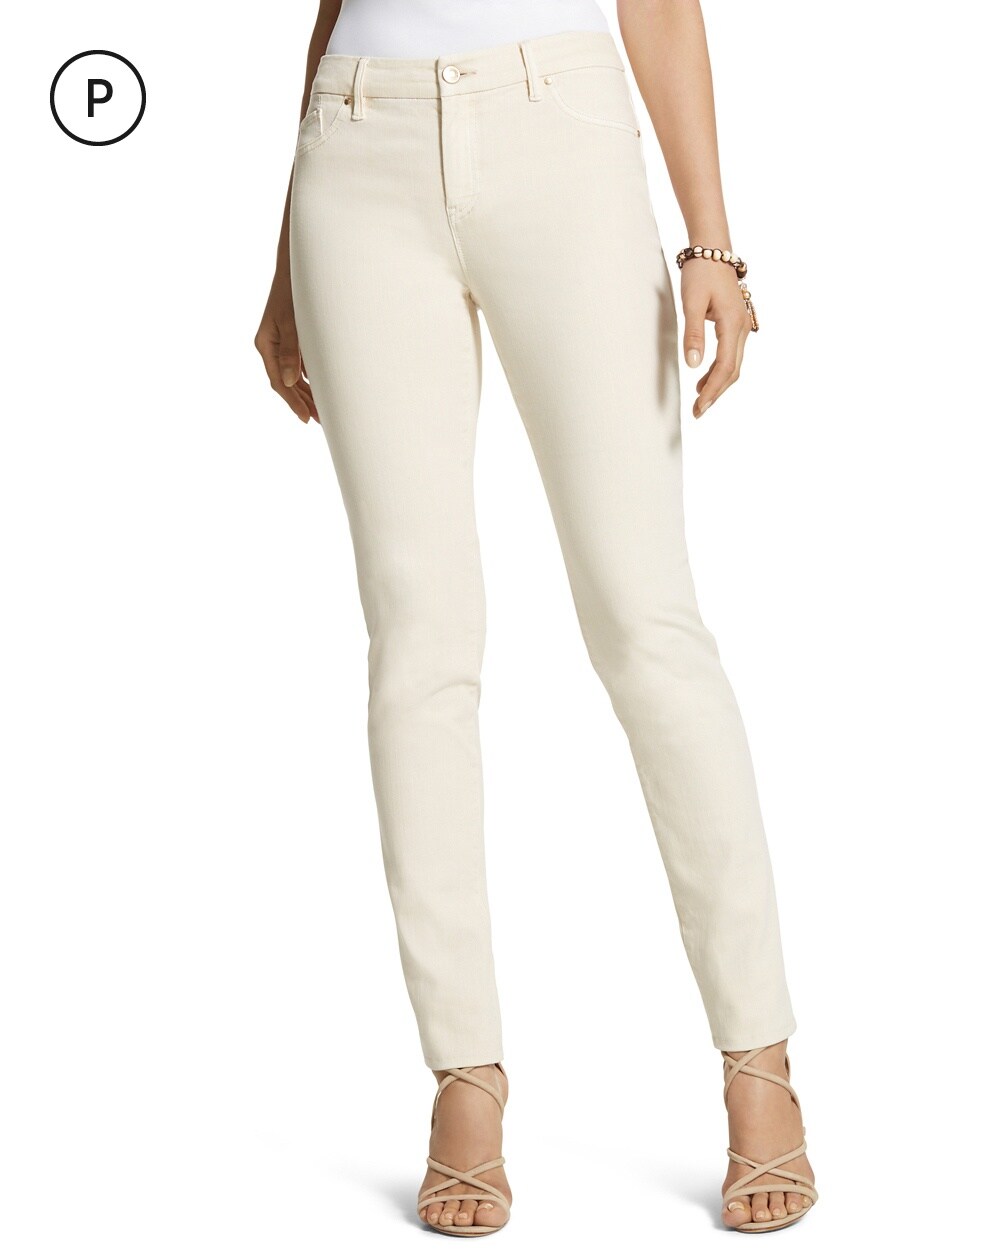 Petite So Slimming By Chico's Jeggings